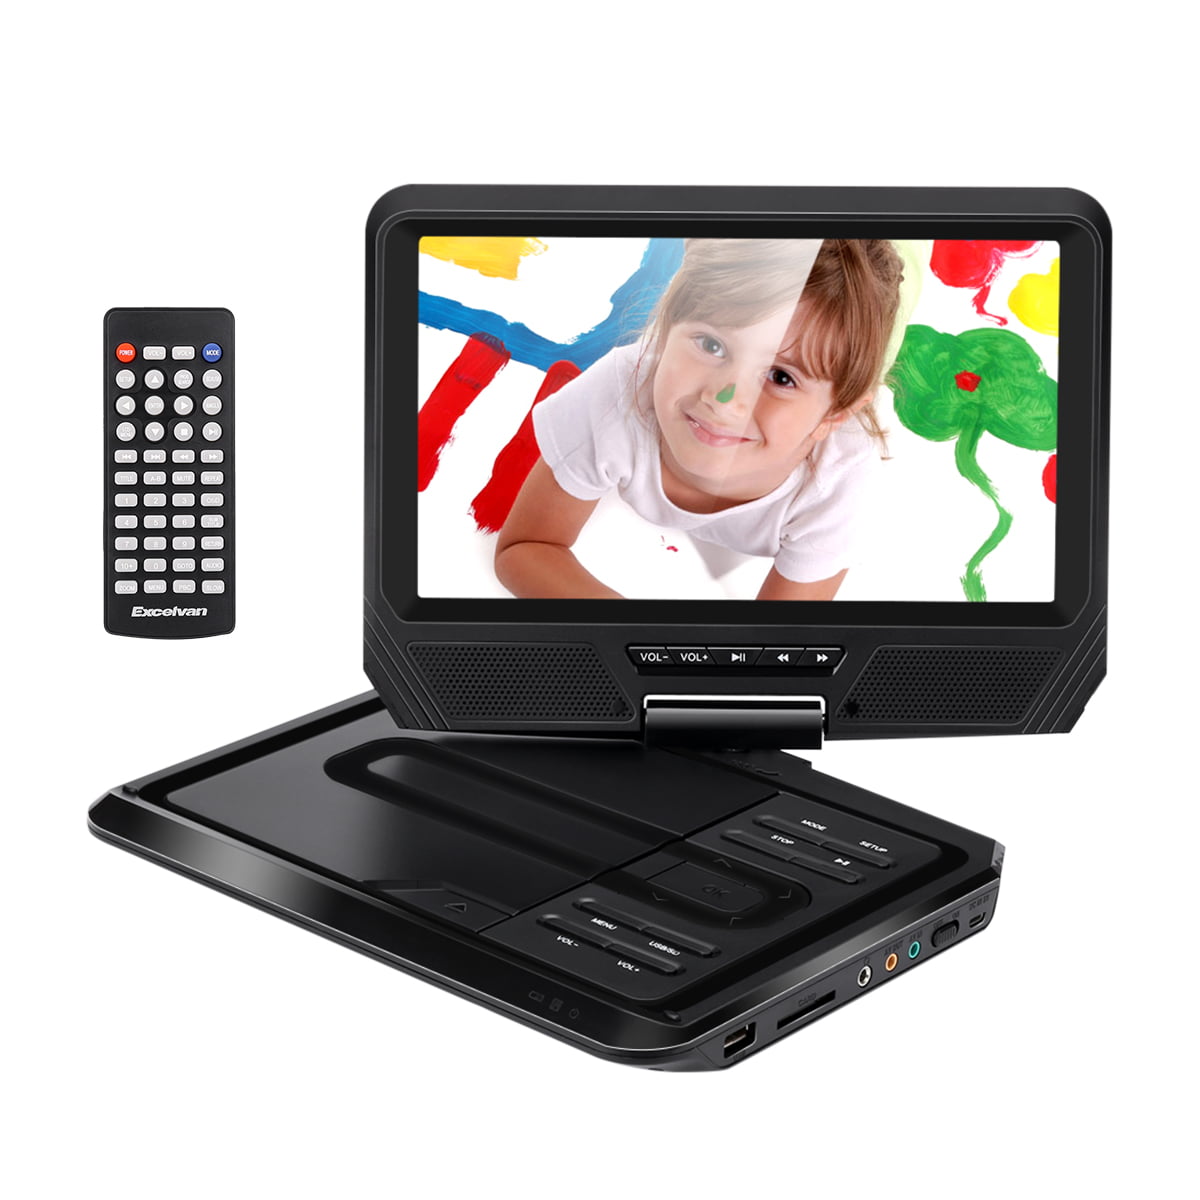 Excelvan Portable Hd 9 Inch Lcd Screen Dvd Player Game Tv Player Fm